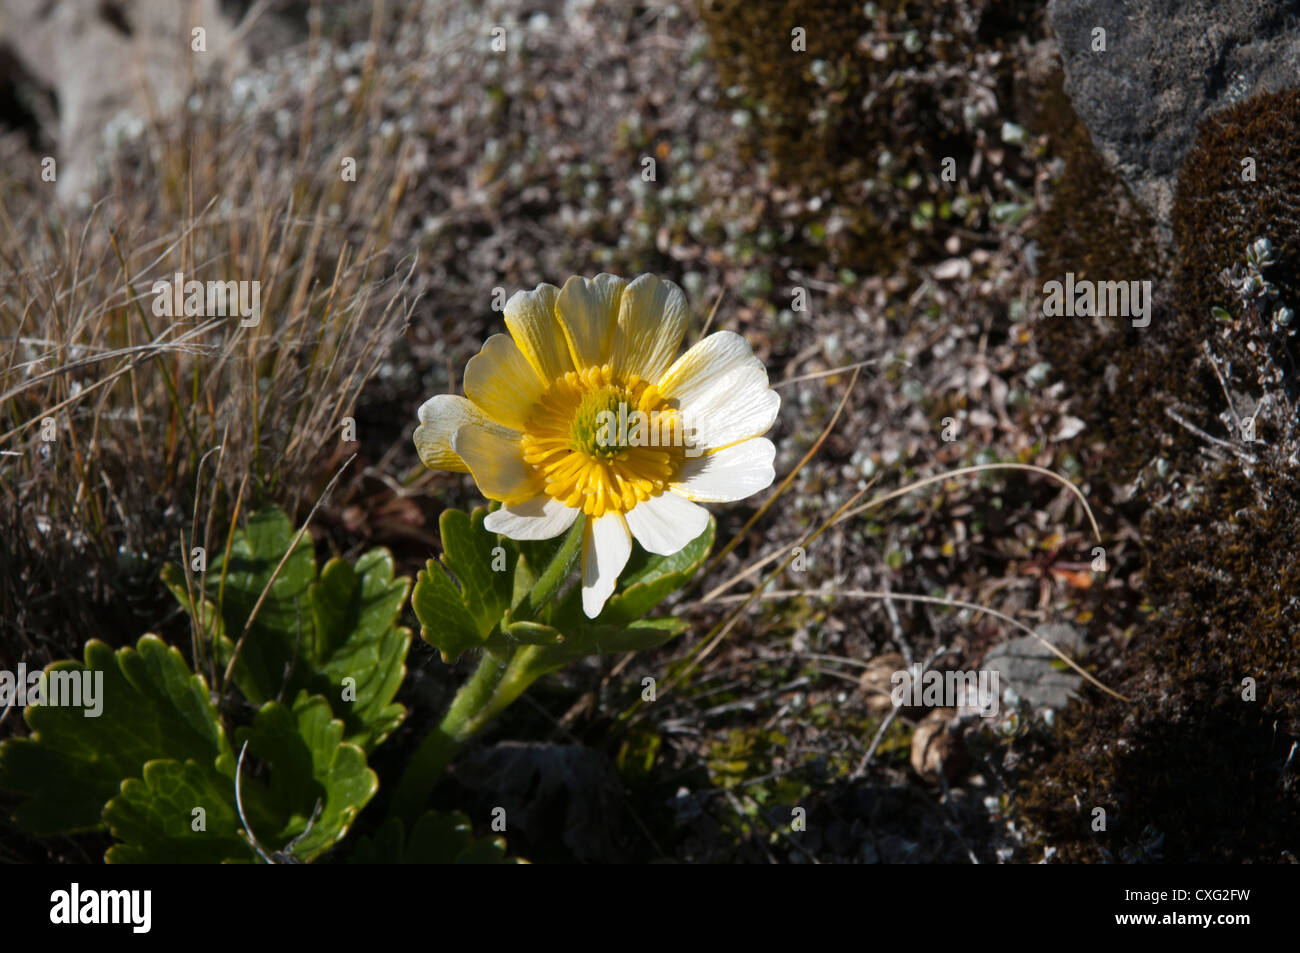 Flowering near the Tama Lakes in1400 meter Ranunculus insignis is a common buttercup in Tongariro national park in New Zealand. Stock Photo